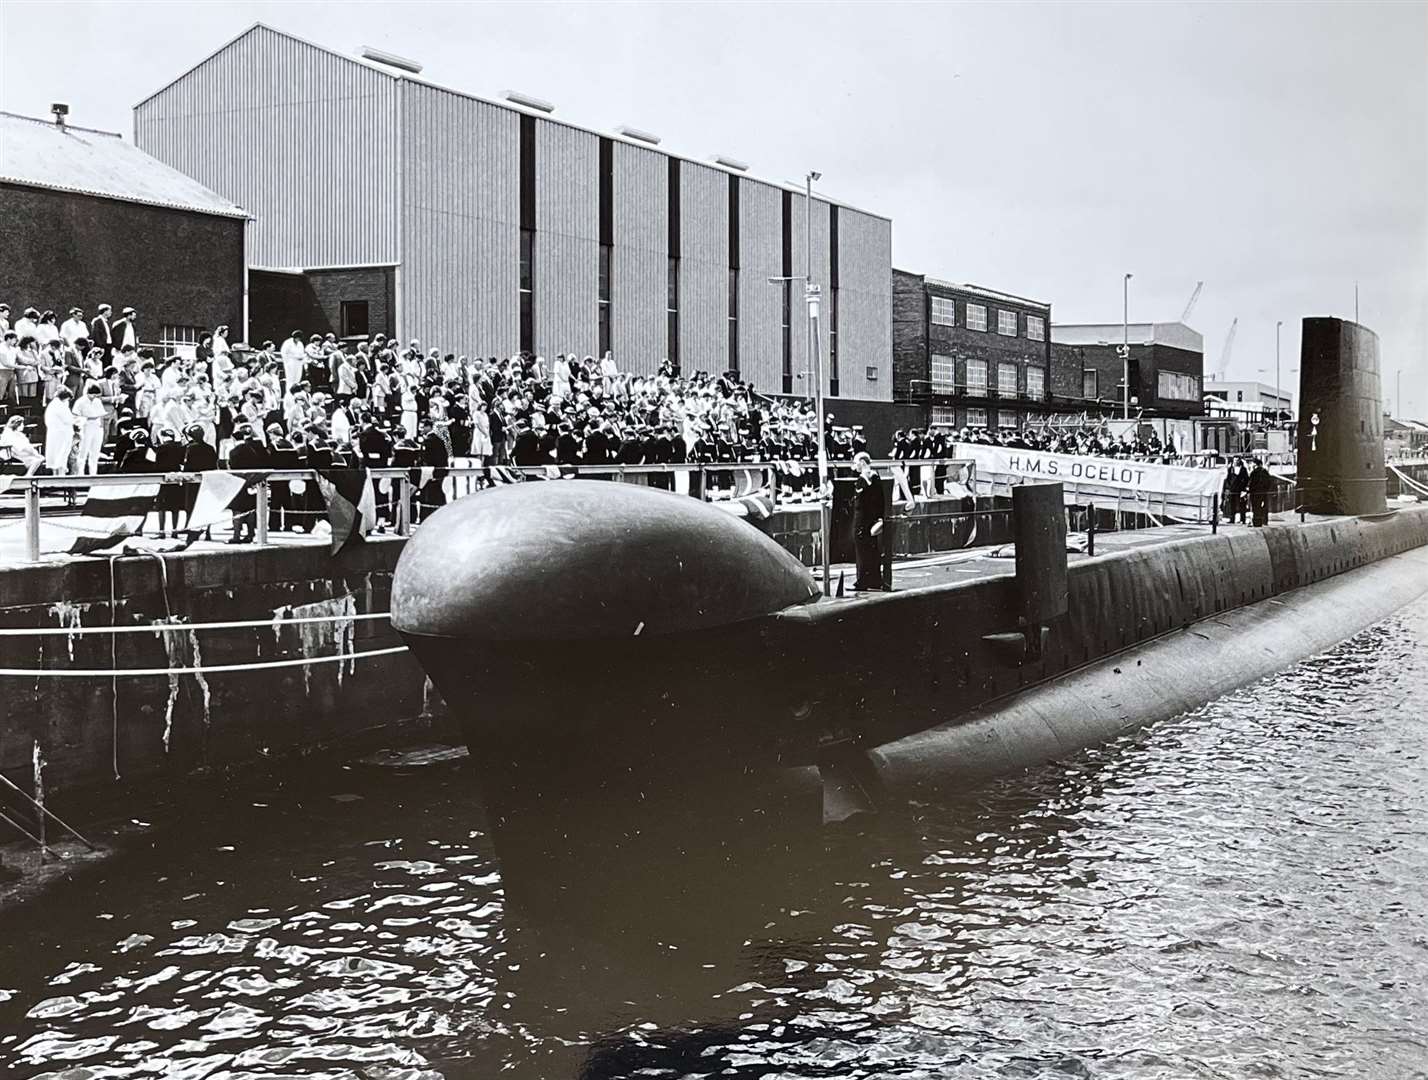 The re-dedication of HMS Ocelot in July 1987. Picture: Royal Navy